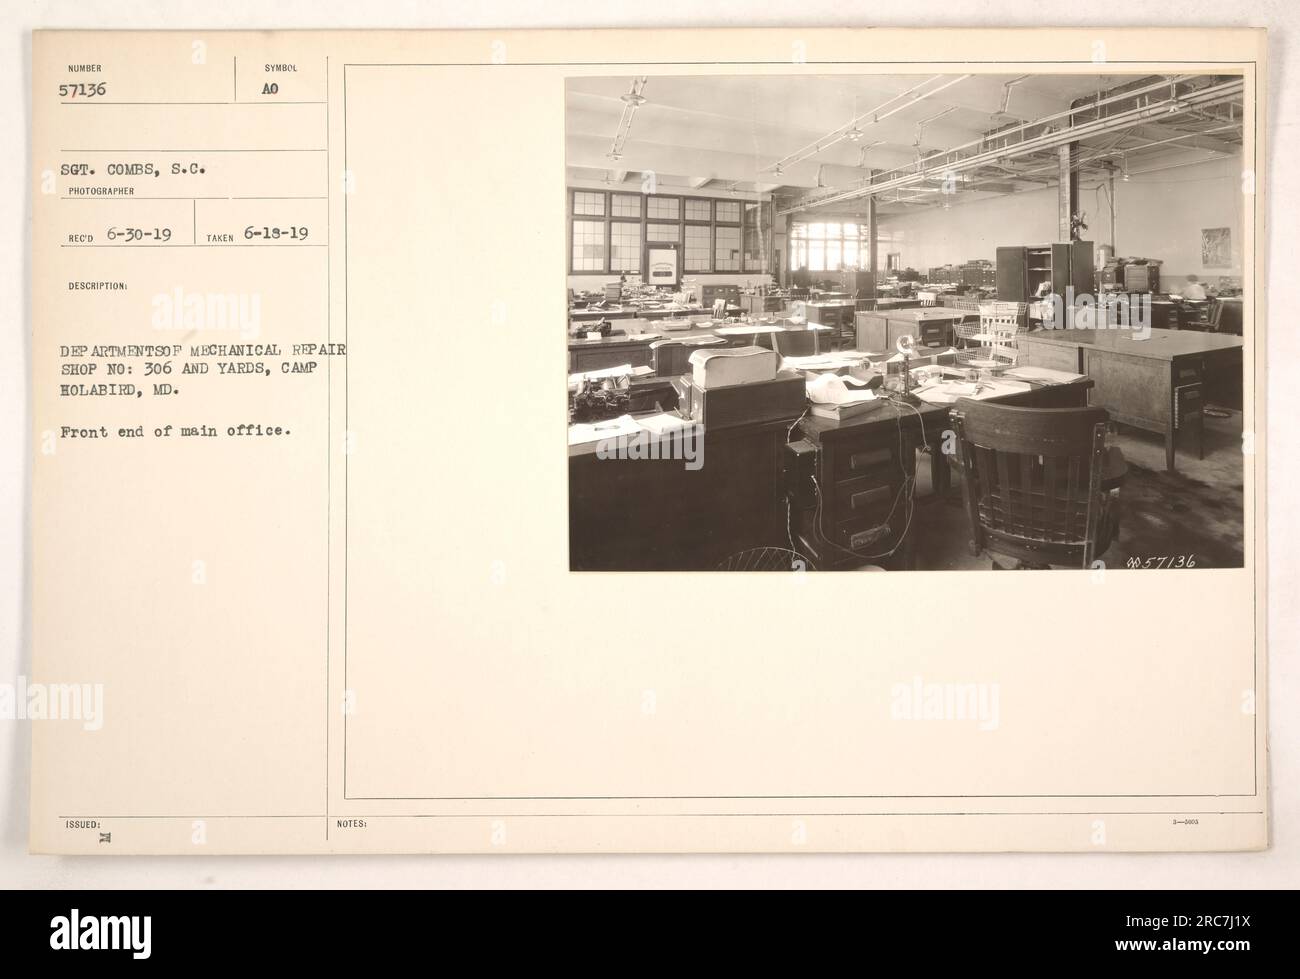 Front view of the main office at the Mechanical Repair Shop No. 306 and Yards located at Camp Holabird, MD. The office bears the number 57136 and was photographed on June 18, 1919, by Sgt. Combs. This image is part of the Photographs of American Military Activities collection. Stock Photo